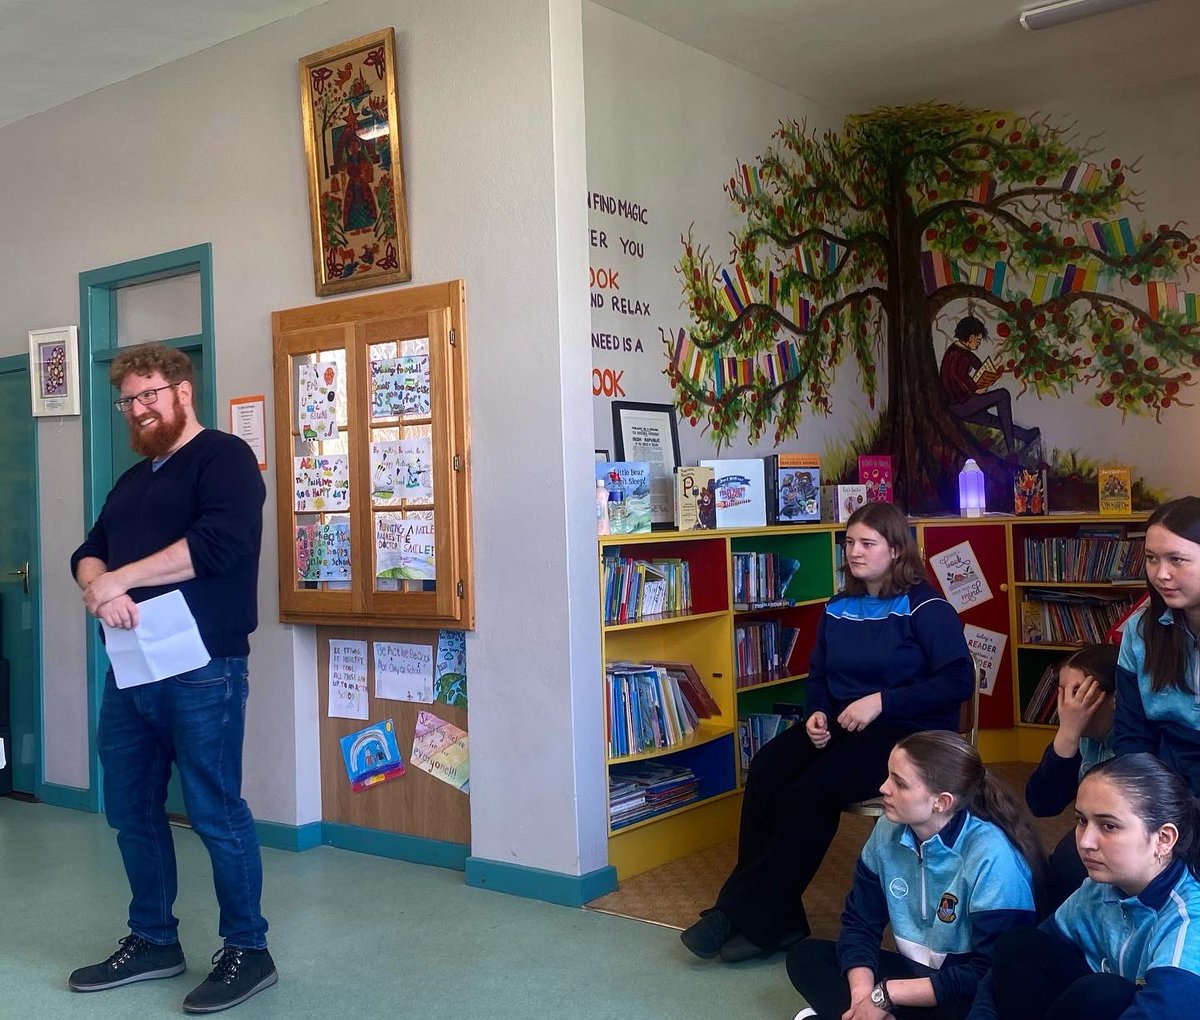 A huge THANK YOU to author Dave Rudden for visiting our school today! 📖👏 

Not only did he open our brand new school library, but he also generously donated over 100 books to fill its shelves with plenty of magic and adventure! 📚✨

#AuthorVisit #SchoolLibrary